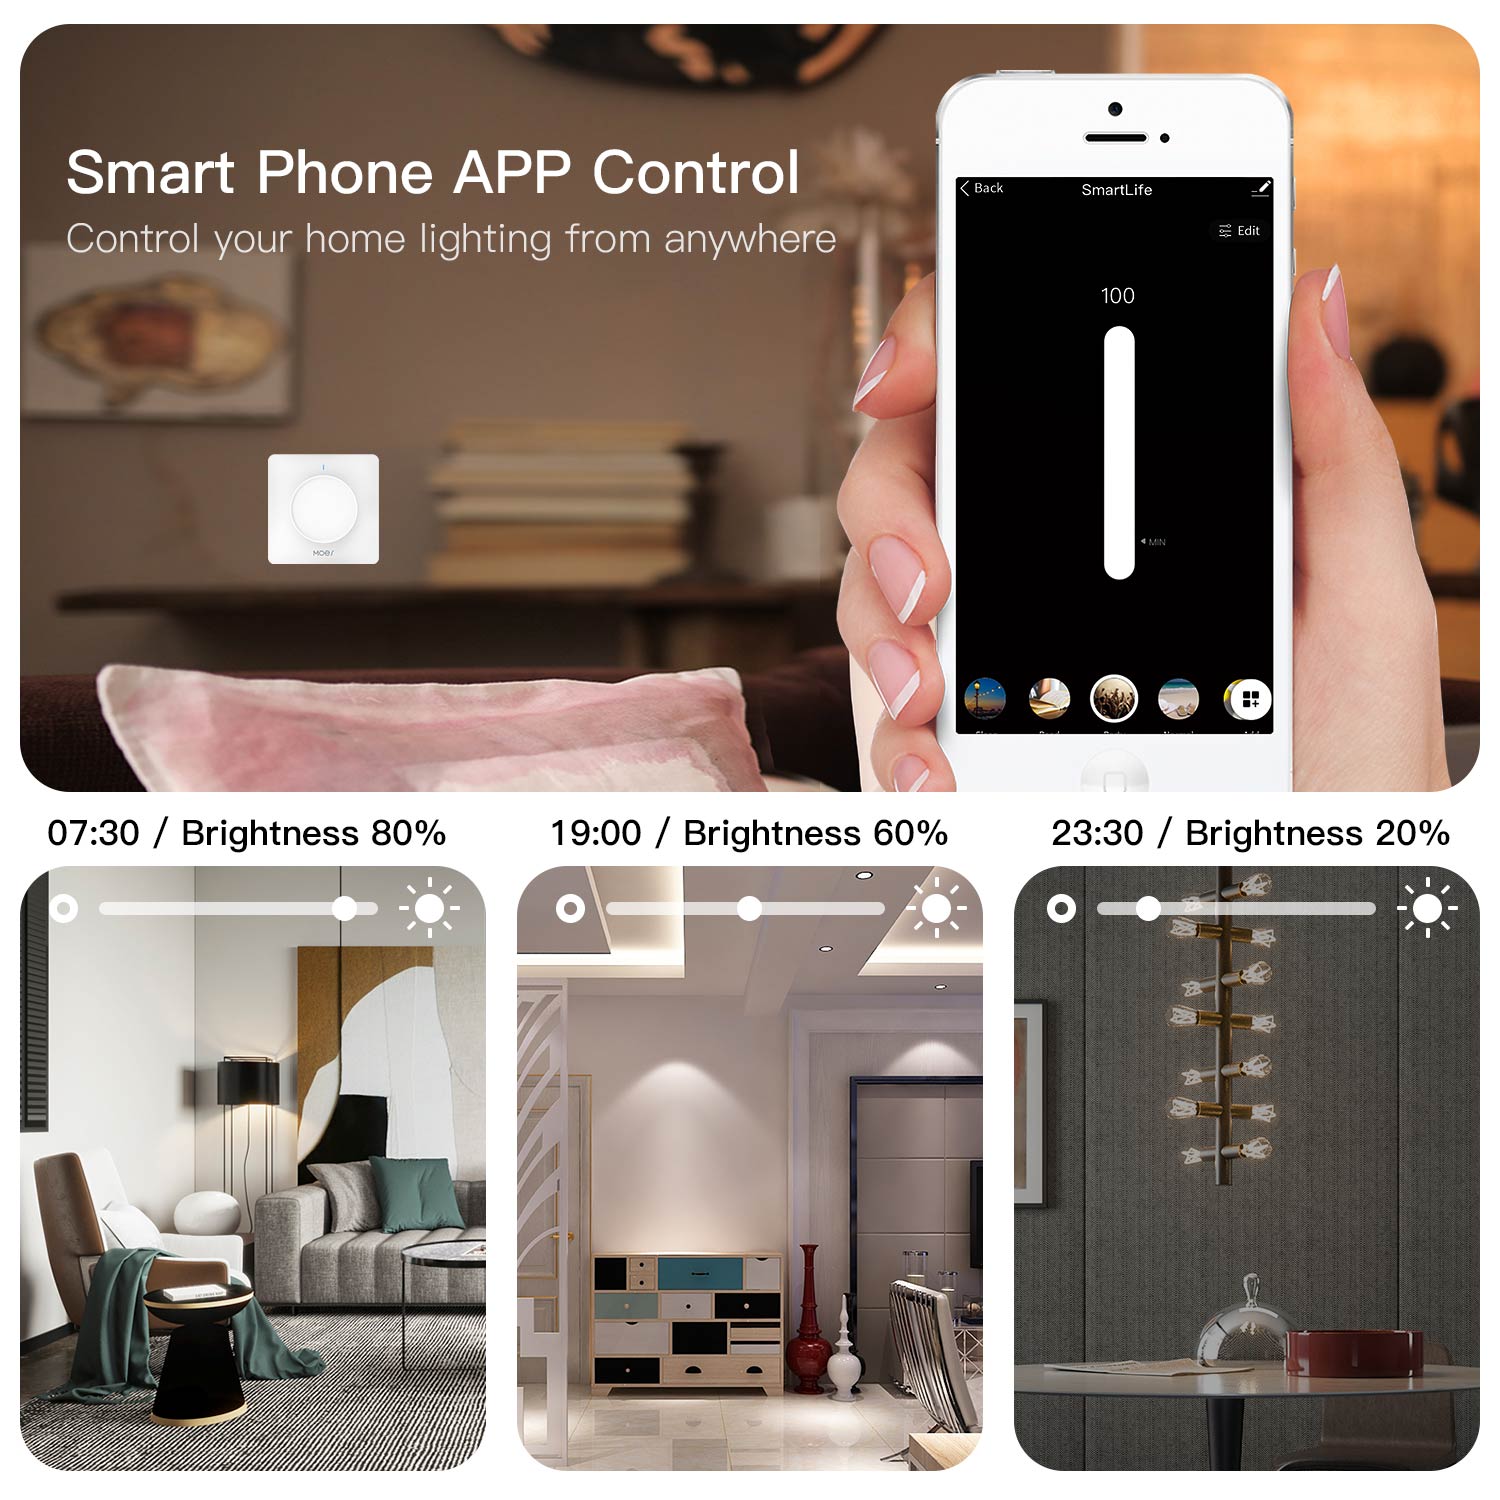 New ZigBee Smart Rotary/Touch Light Dimmer Switch Smart Life/Tuya APP Remote Control Works with Alexa Google Voice Assistants EU